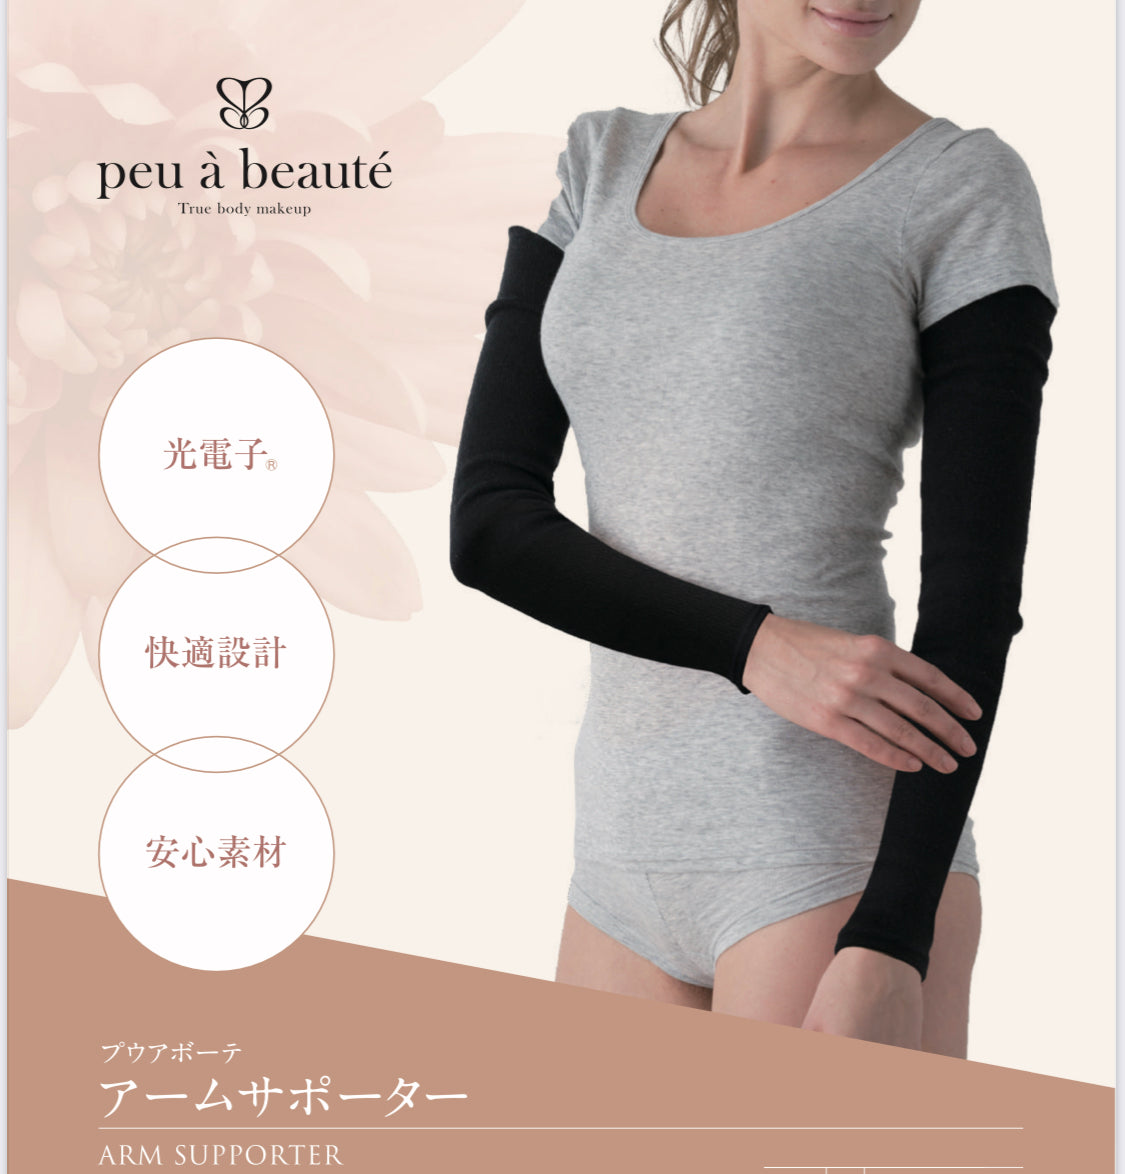 Queen's Market: Beauty Activewear   Arm Supporter   Made in Japan